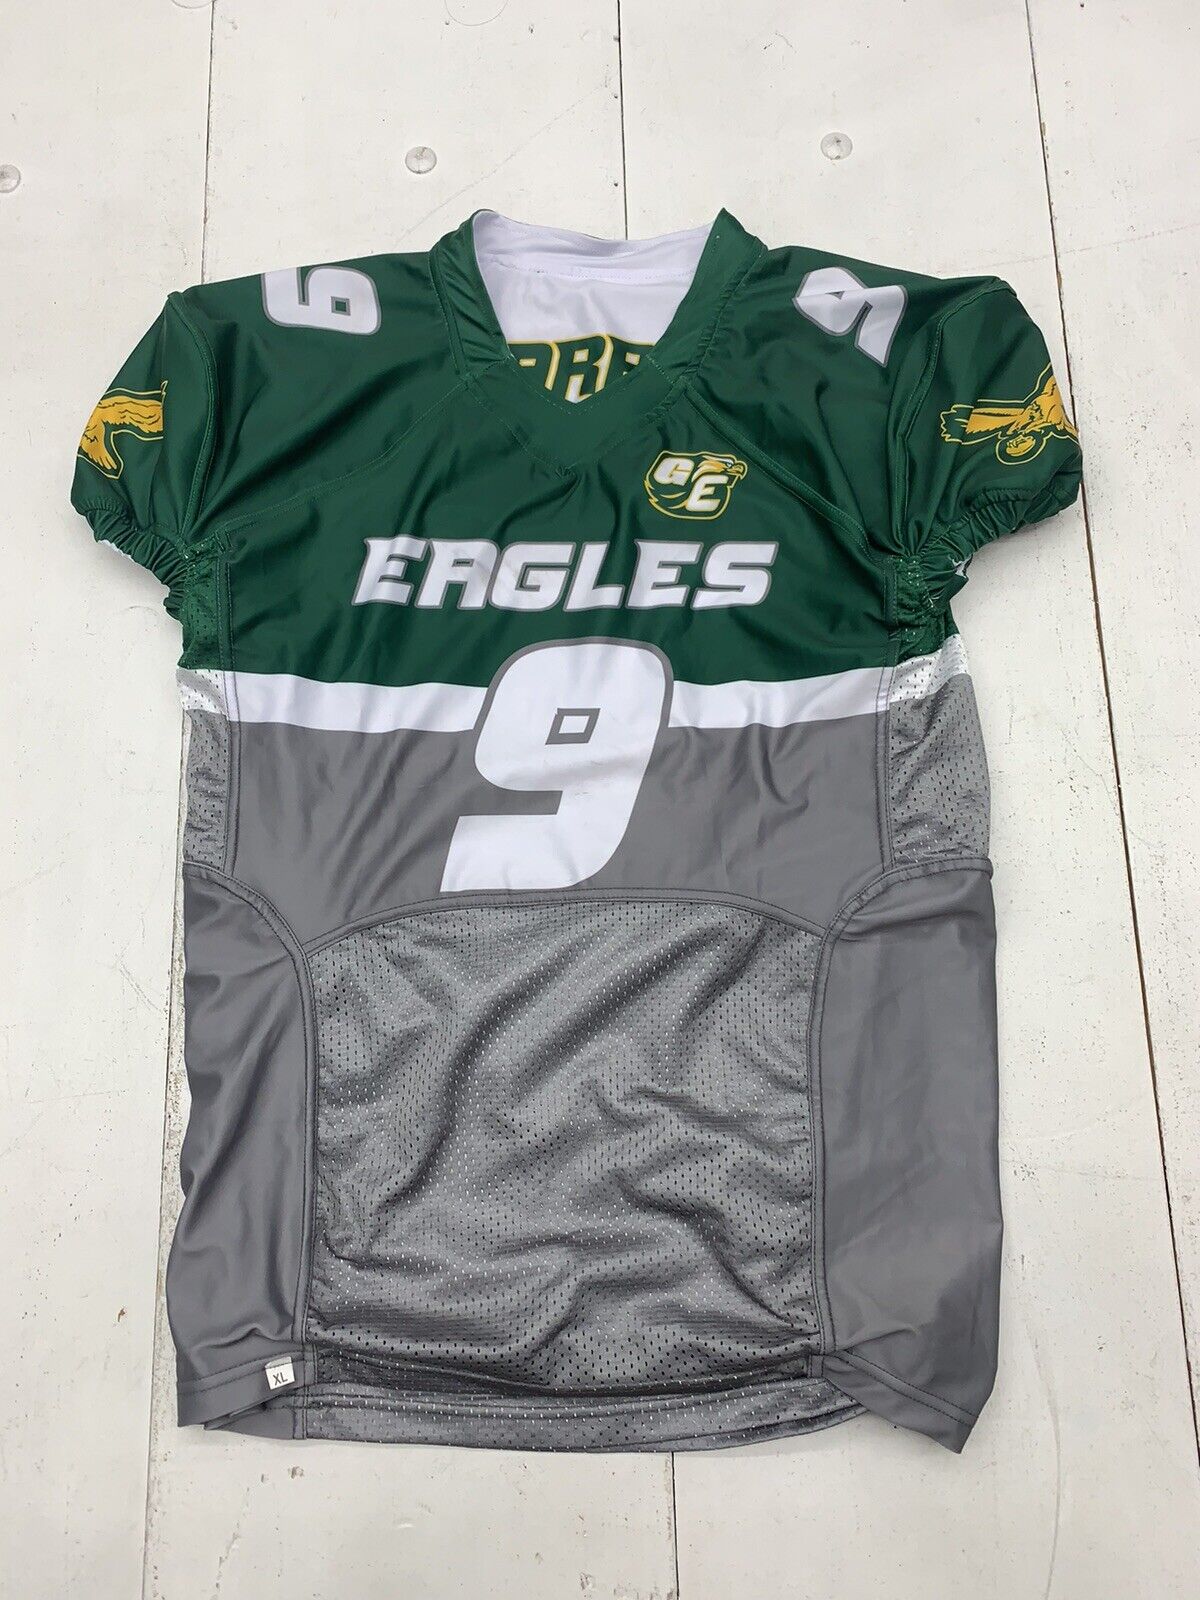 GE Eagles Mens Green White Reversible Football Jersey Size XL